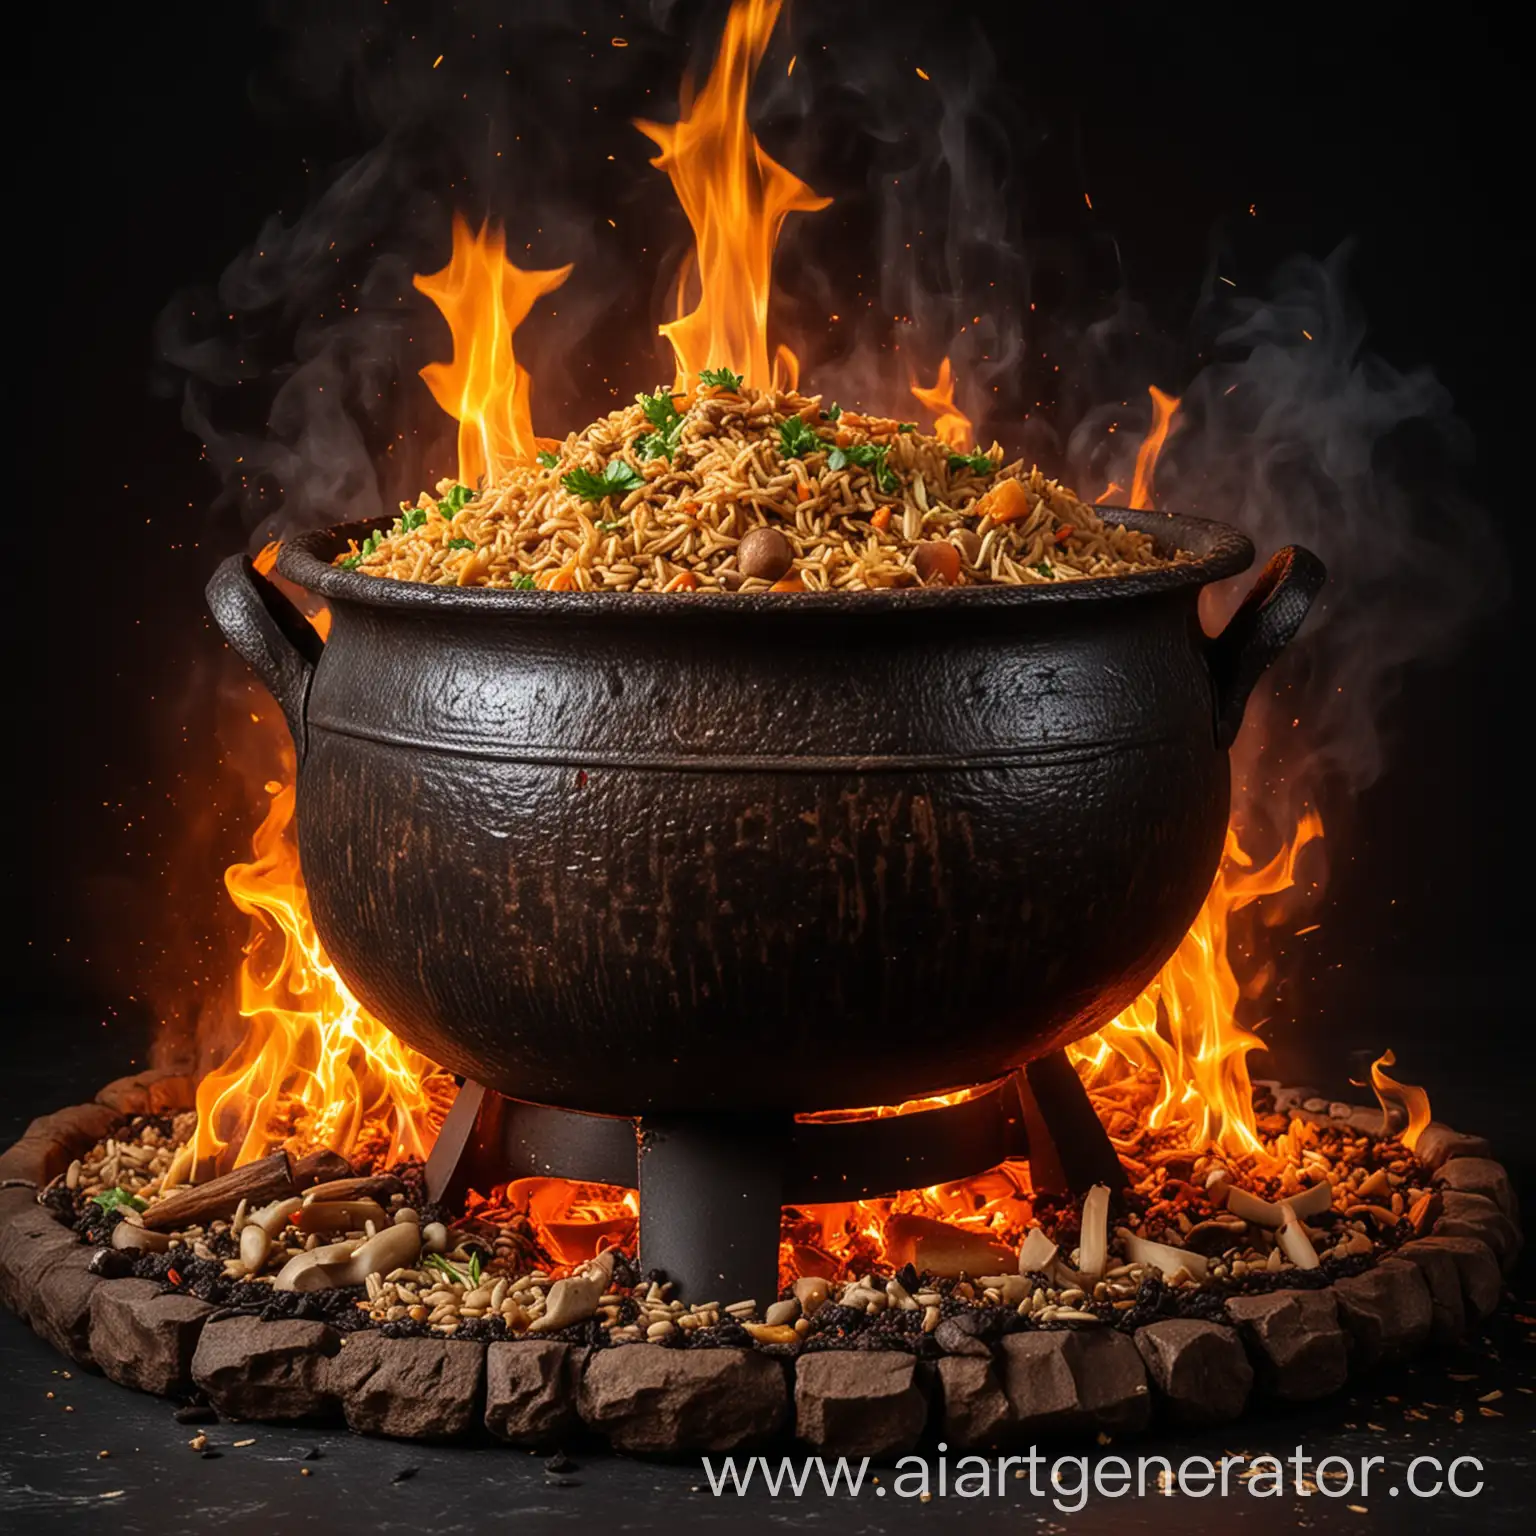 Uzbek-Pilaf-Cooking-in-Flaming-Cauldron-Traditional-Cuisine-Photography